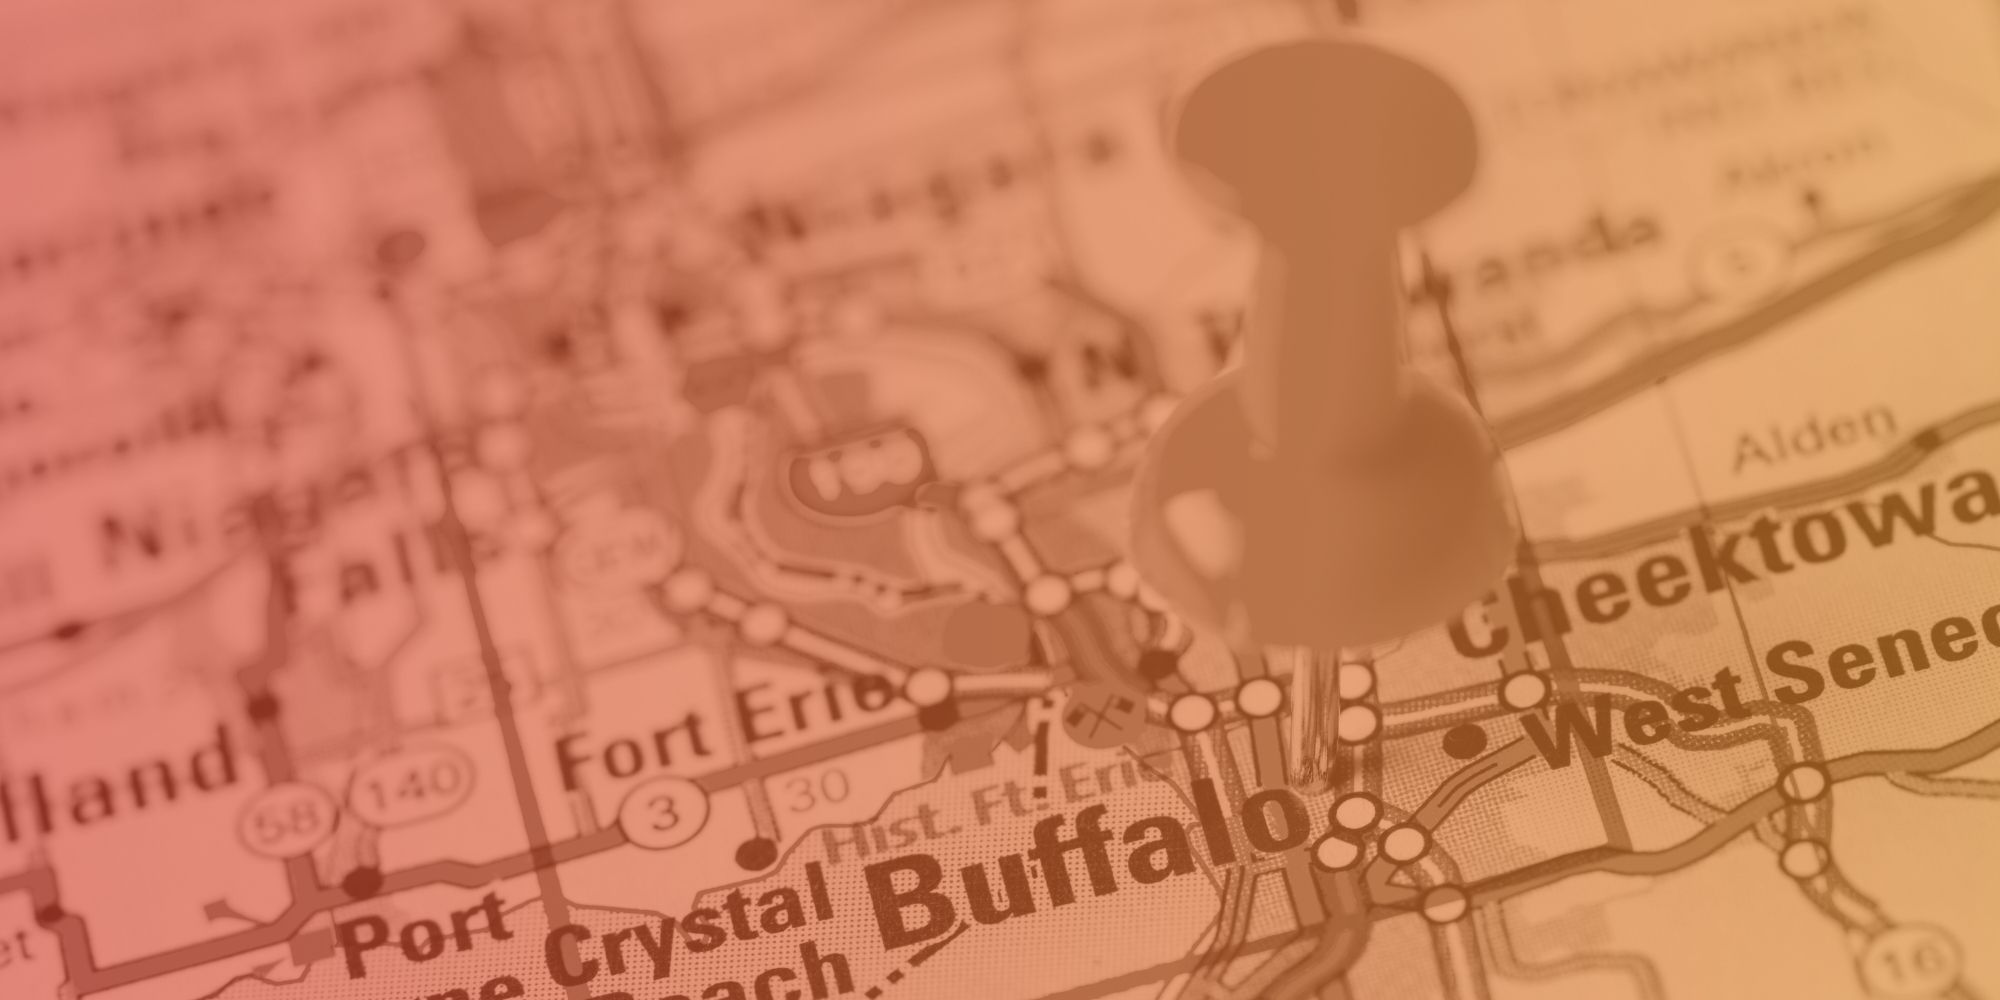 What Development Projects Work in Buffalo Right Now?